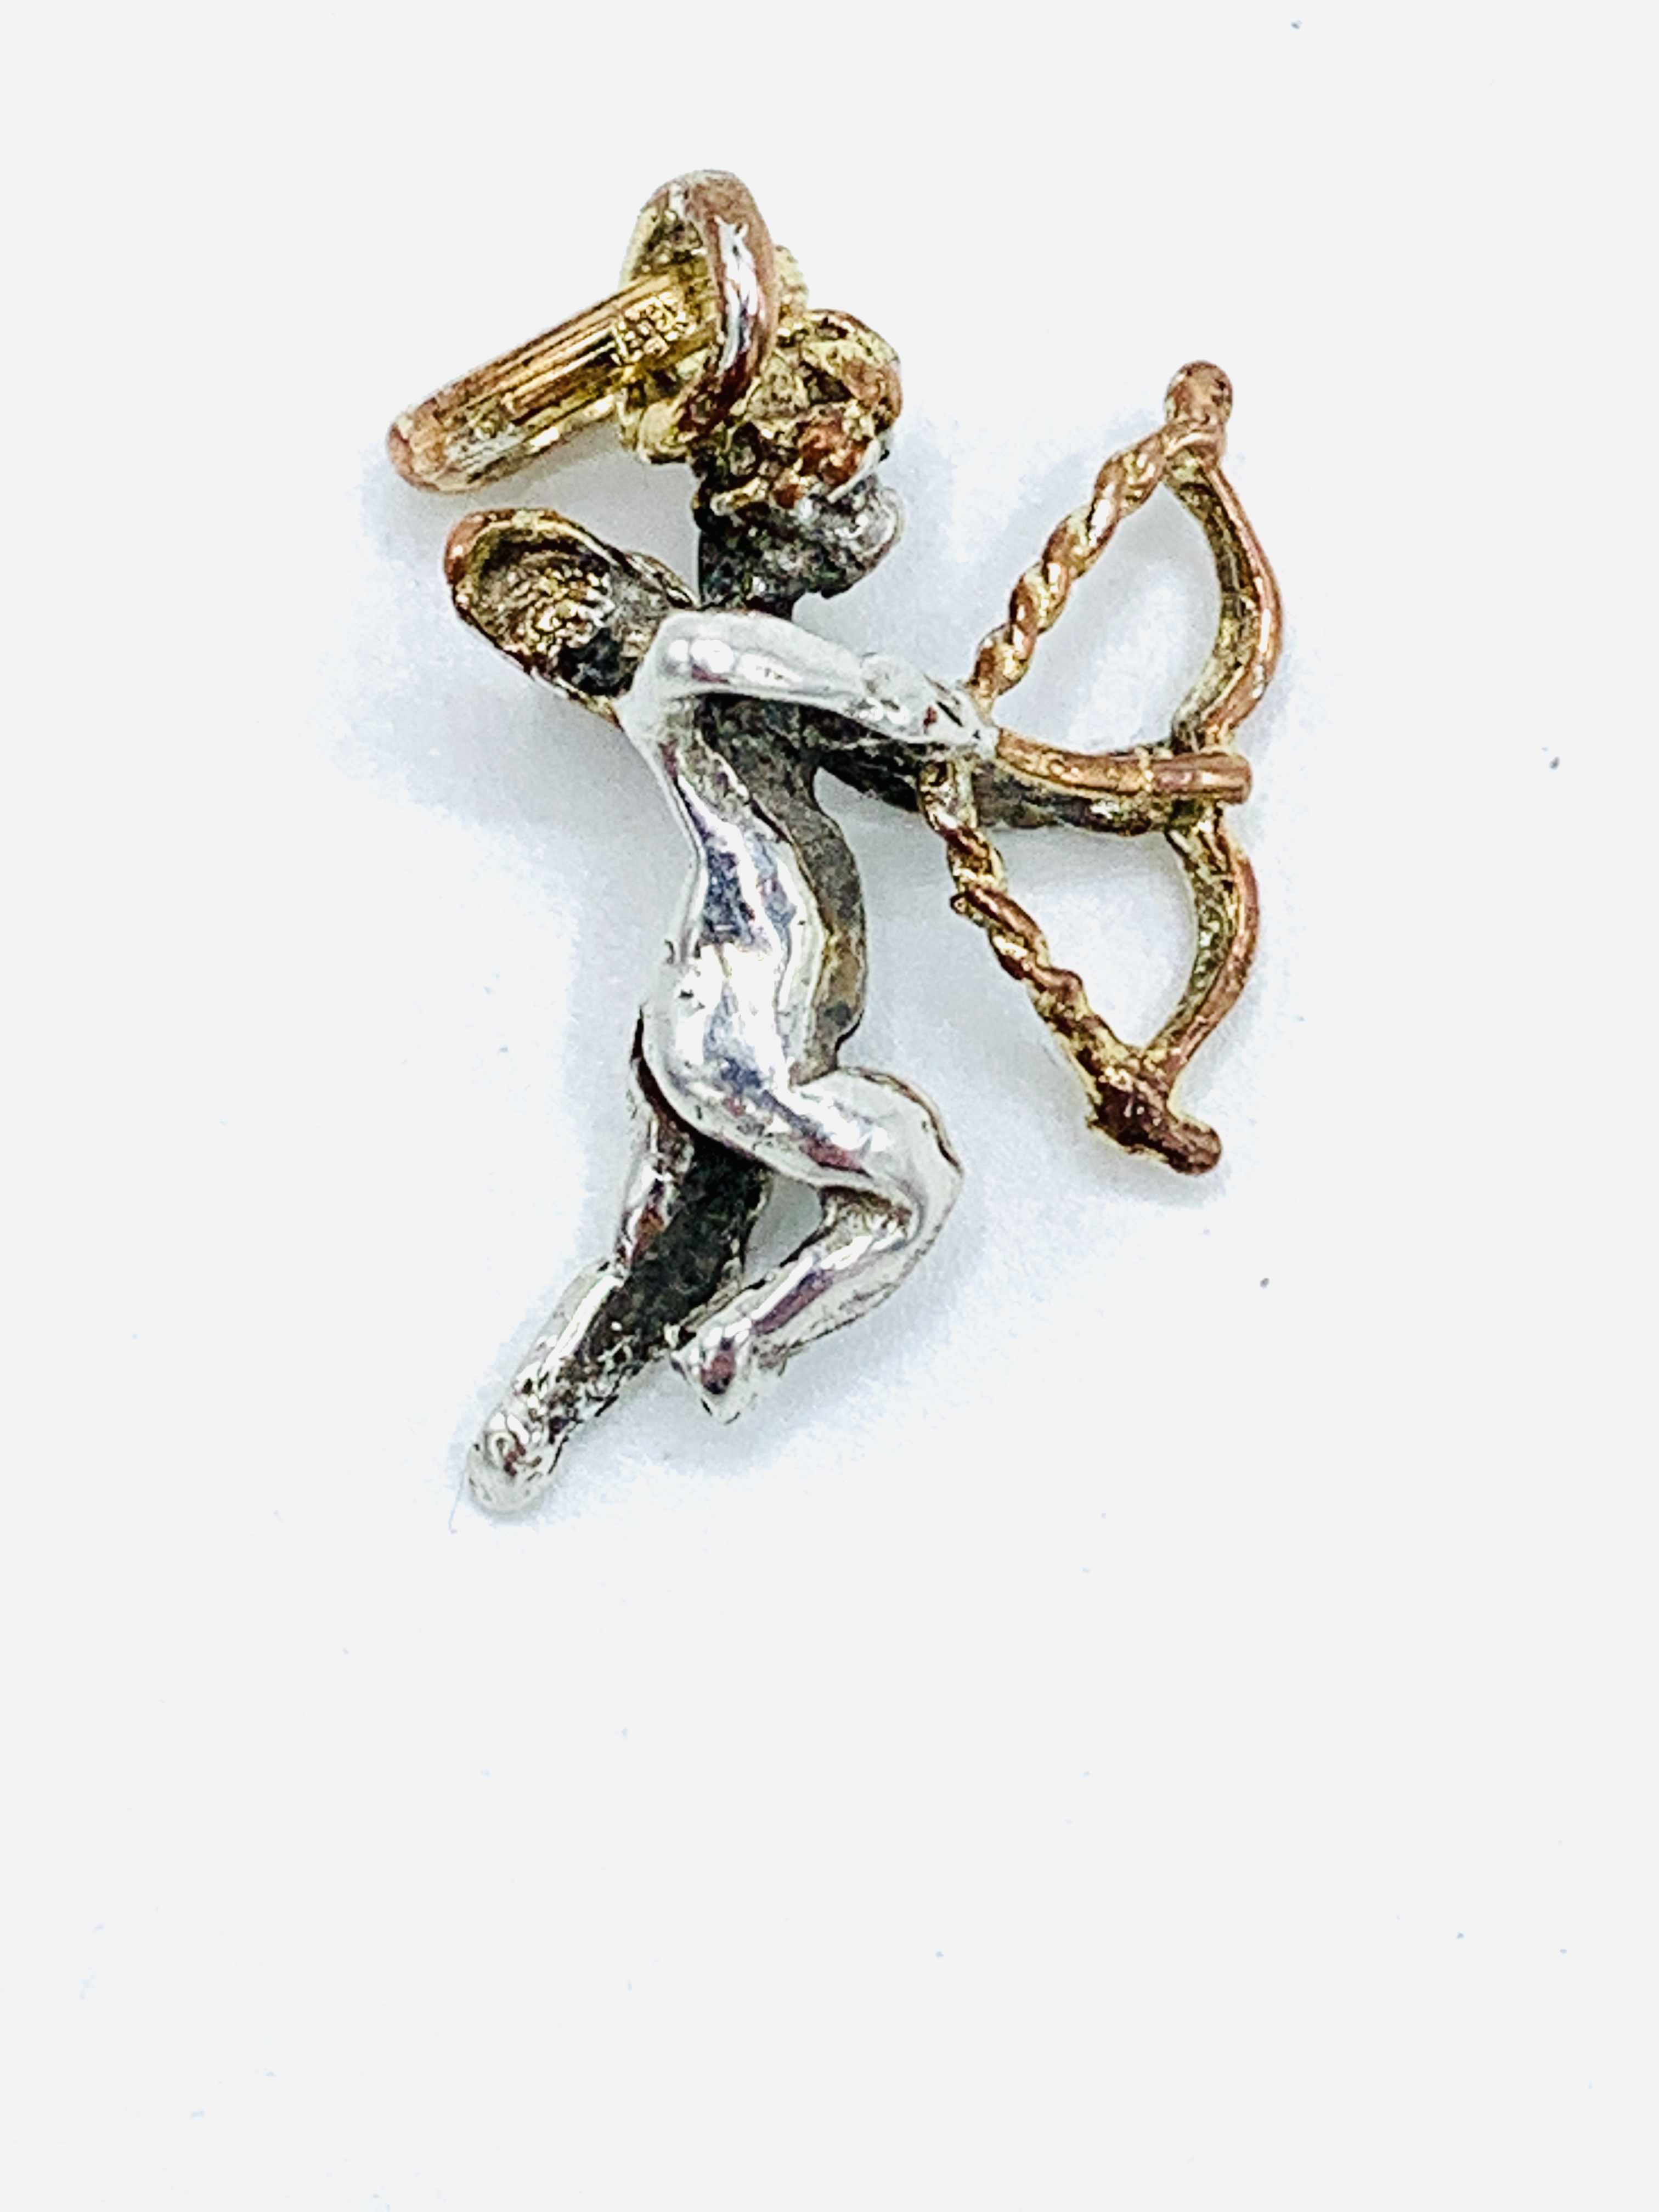 Victorian silver cupid pendant with gilded wings, bow and halo.